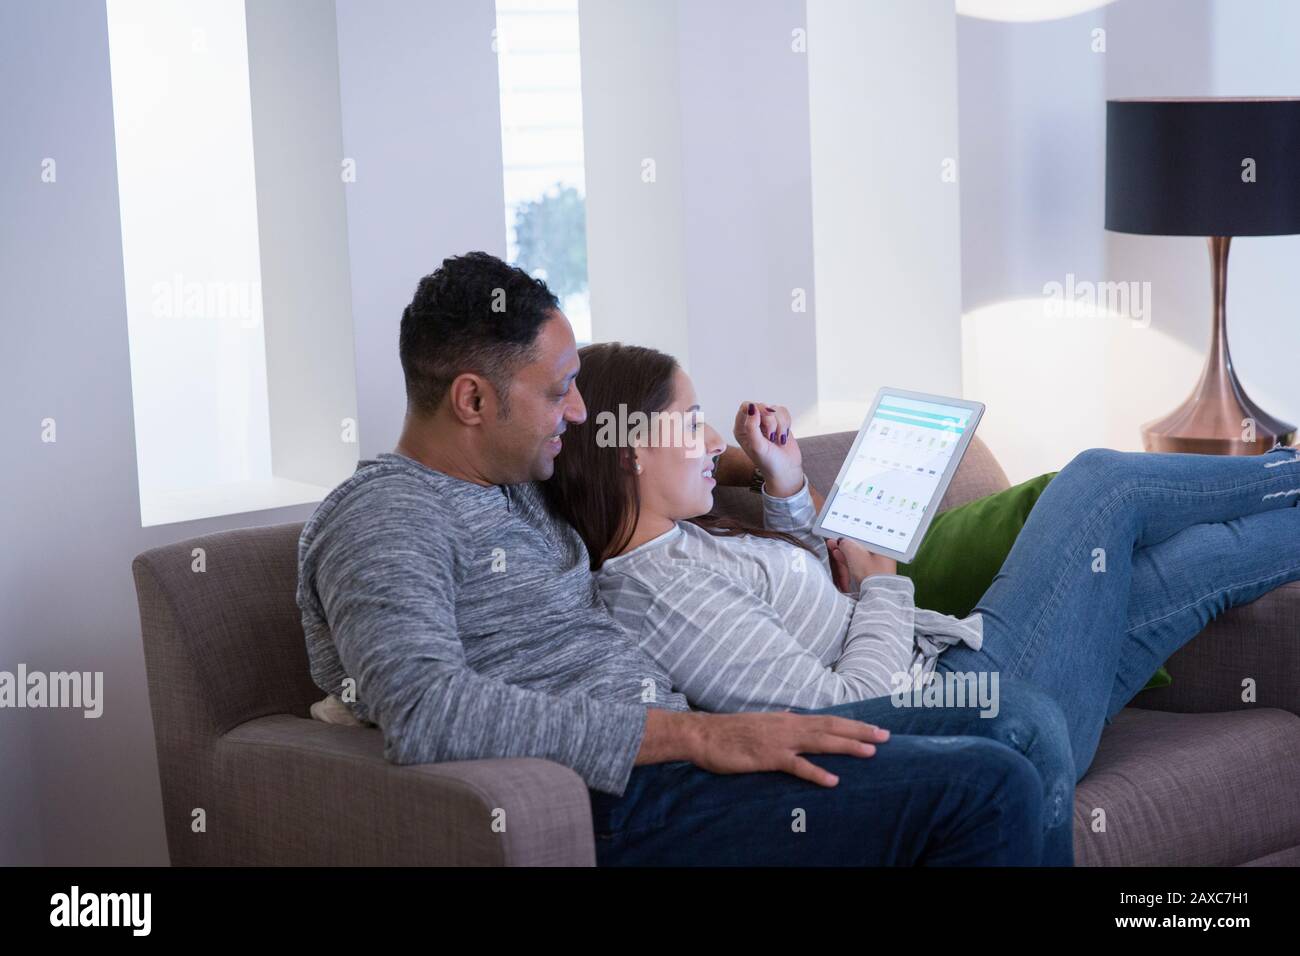 Couple relaxing, using digital tablet on living room sofa Stock Photo